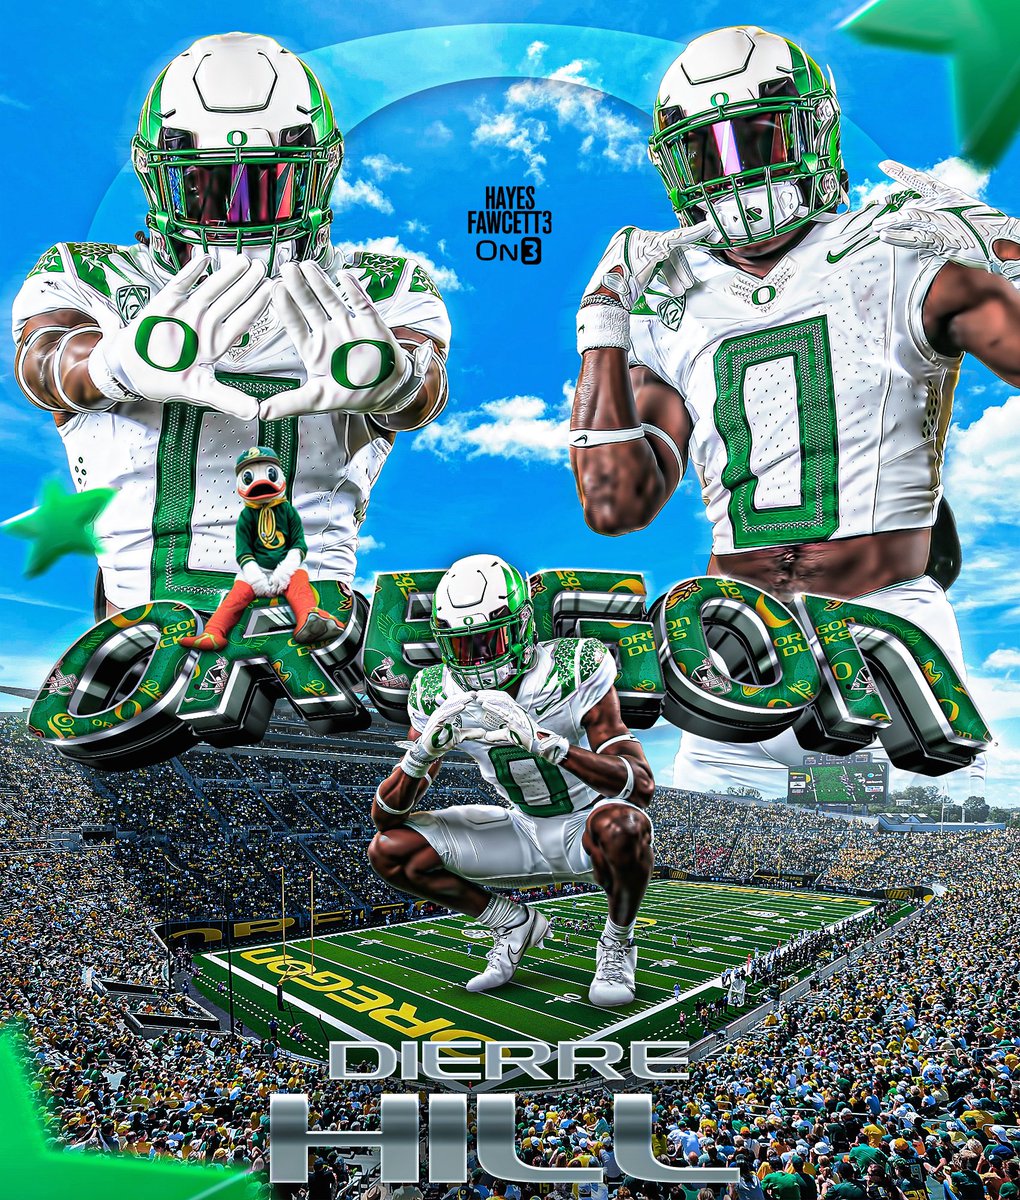 BREAKING: Four-Star ATH Dierre Hill Jr. has Committed to Oregon, he tells me for @on3recruits The 6’0 185 ATH from Belleville, IL chose the Ducks over Ohio State & Illinois “All glory to God, My Lord and Savior!”🙏🏾 on3.com/db/dierre-hill…